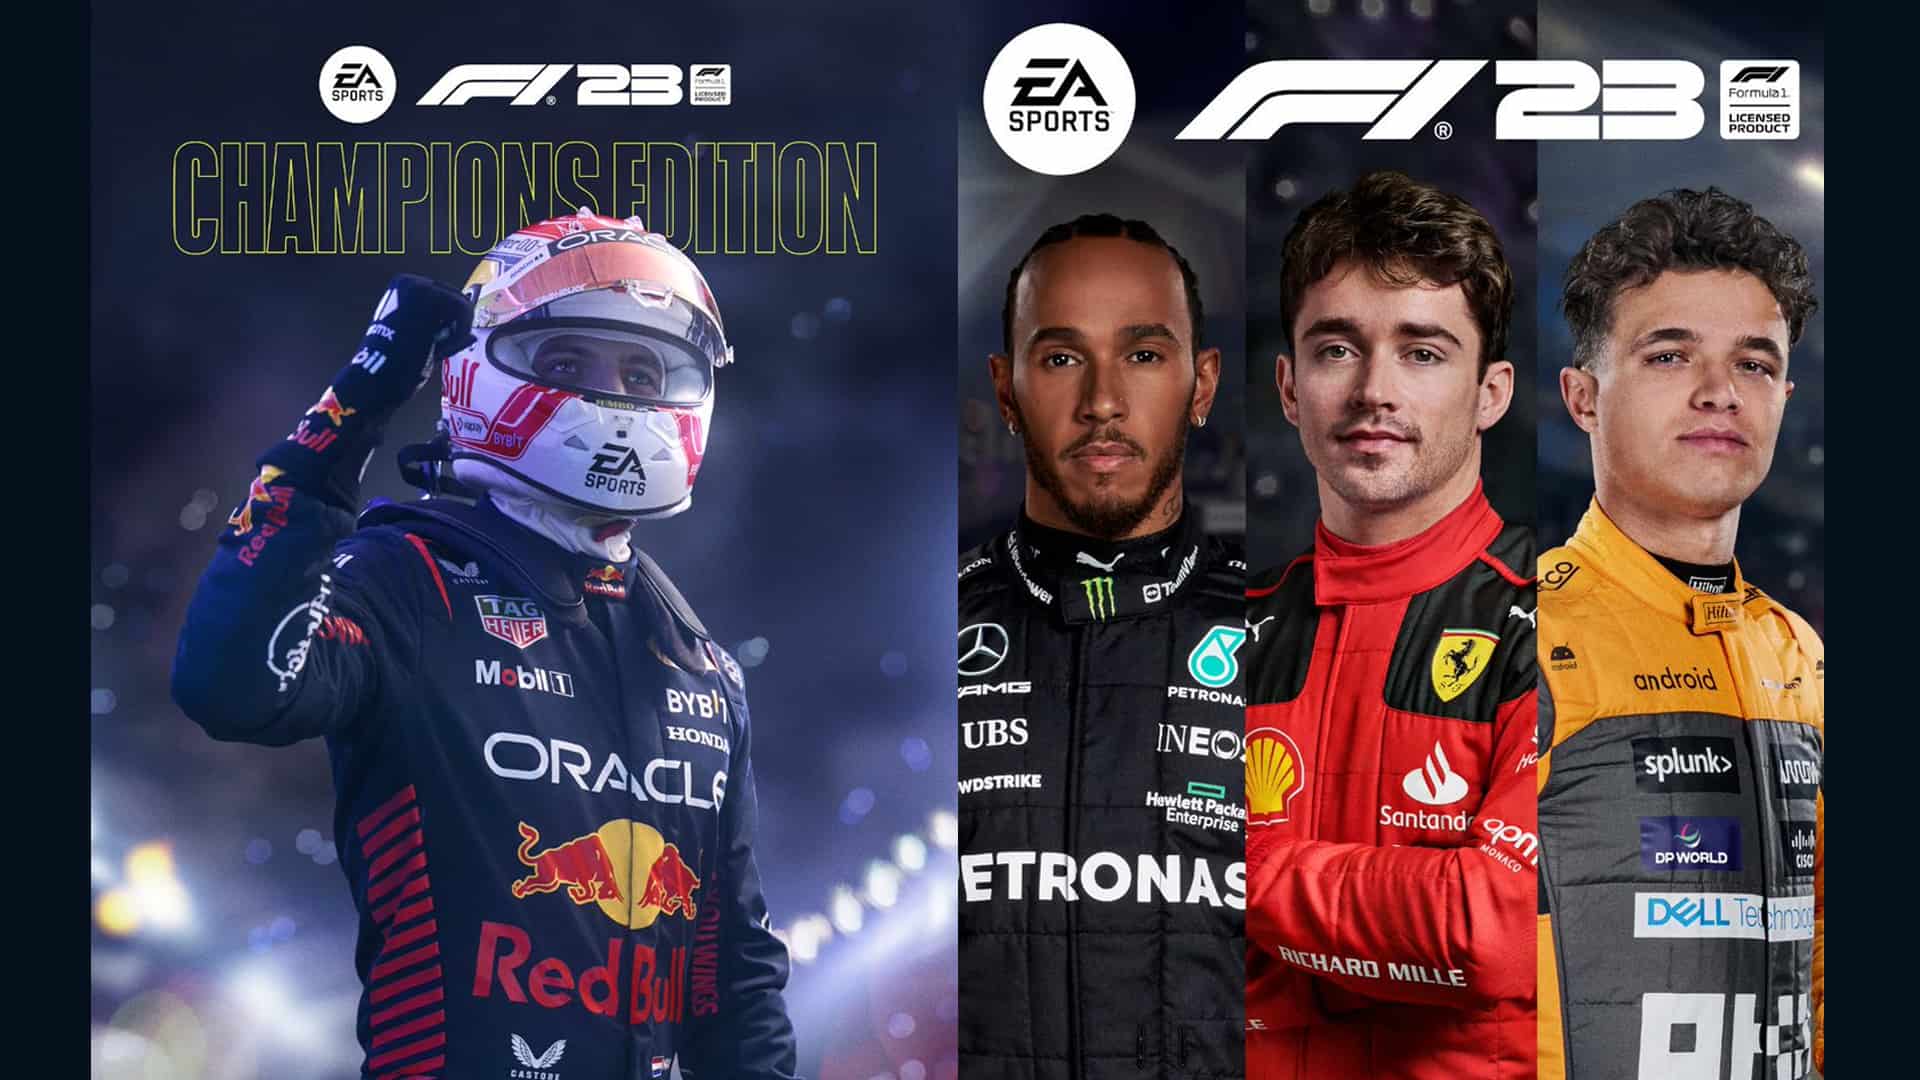 Race against Verstappen and Leclerc in new F1 23 game feature